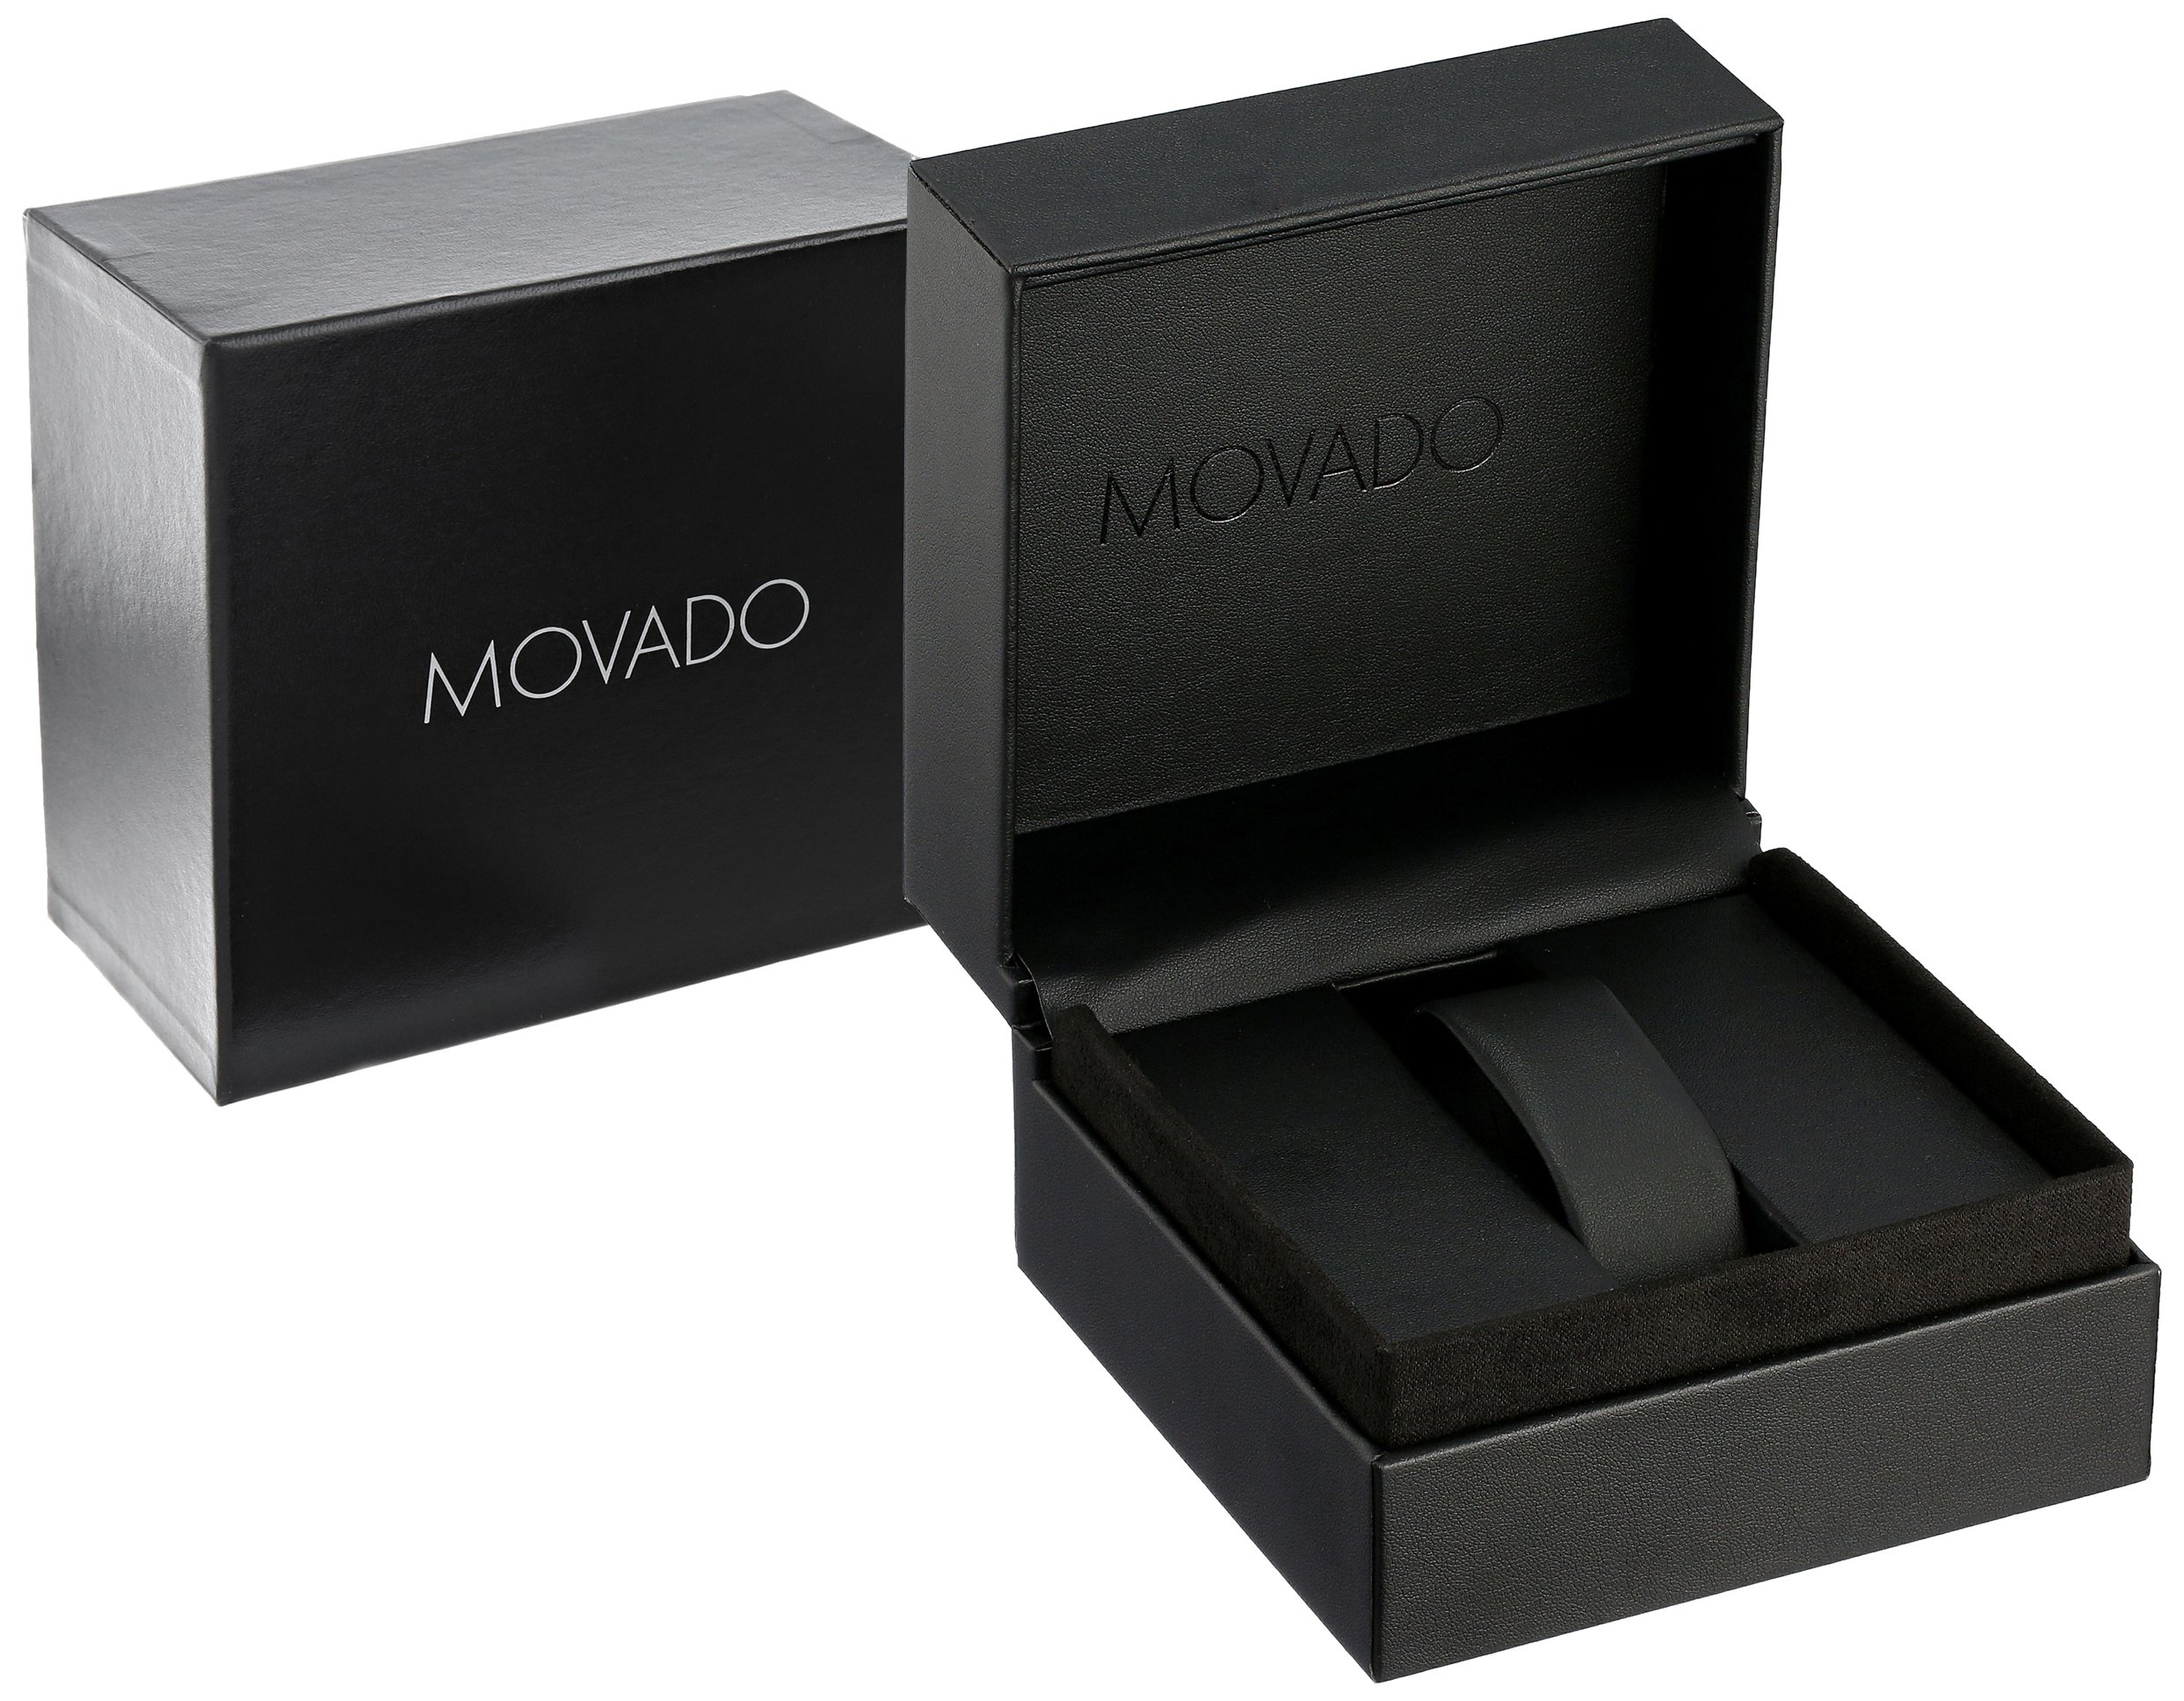 Movado Men's 0606915 Analog Display Swiss Automatic Silver Watch